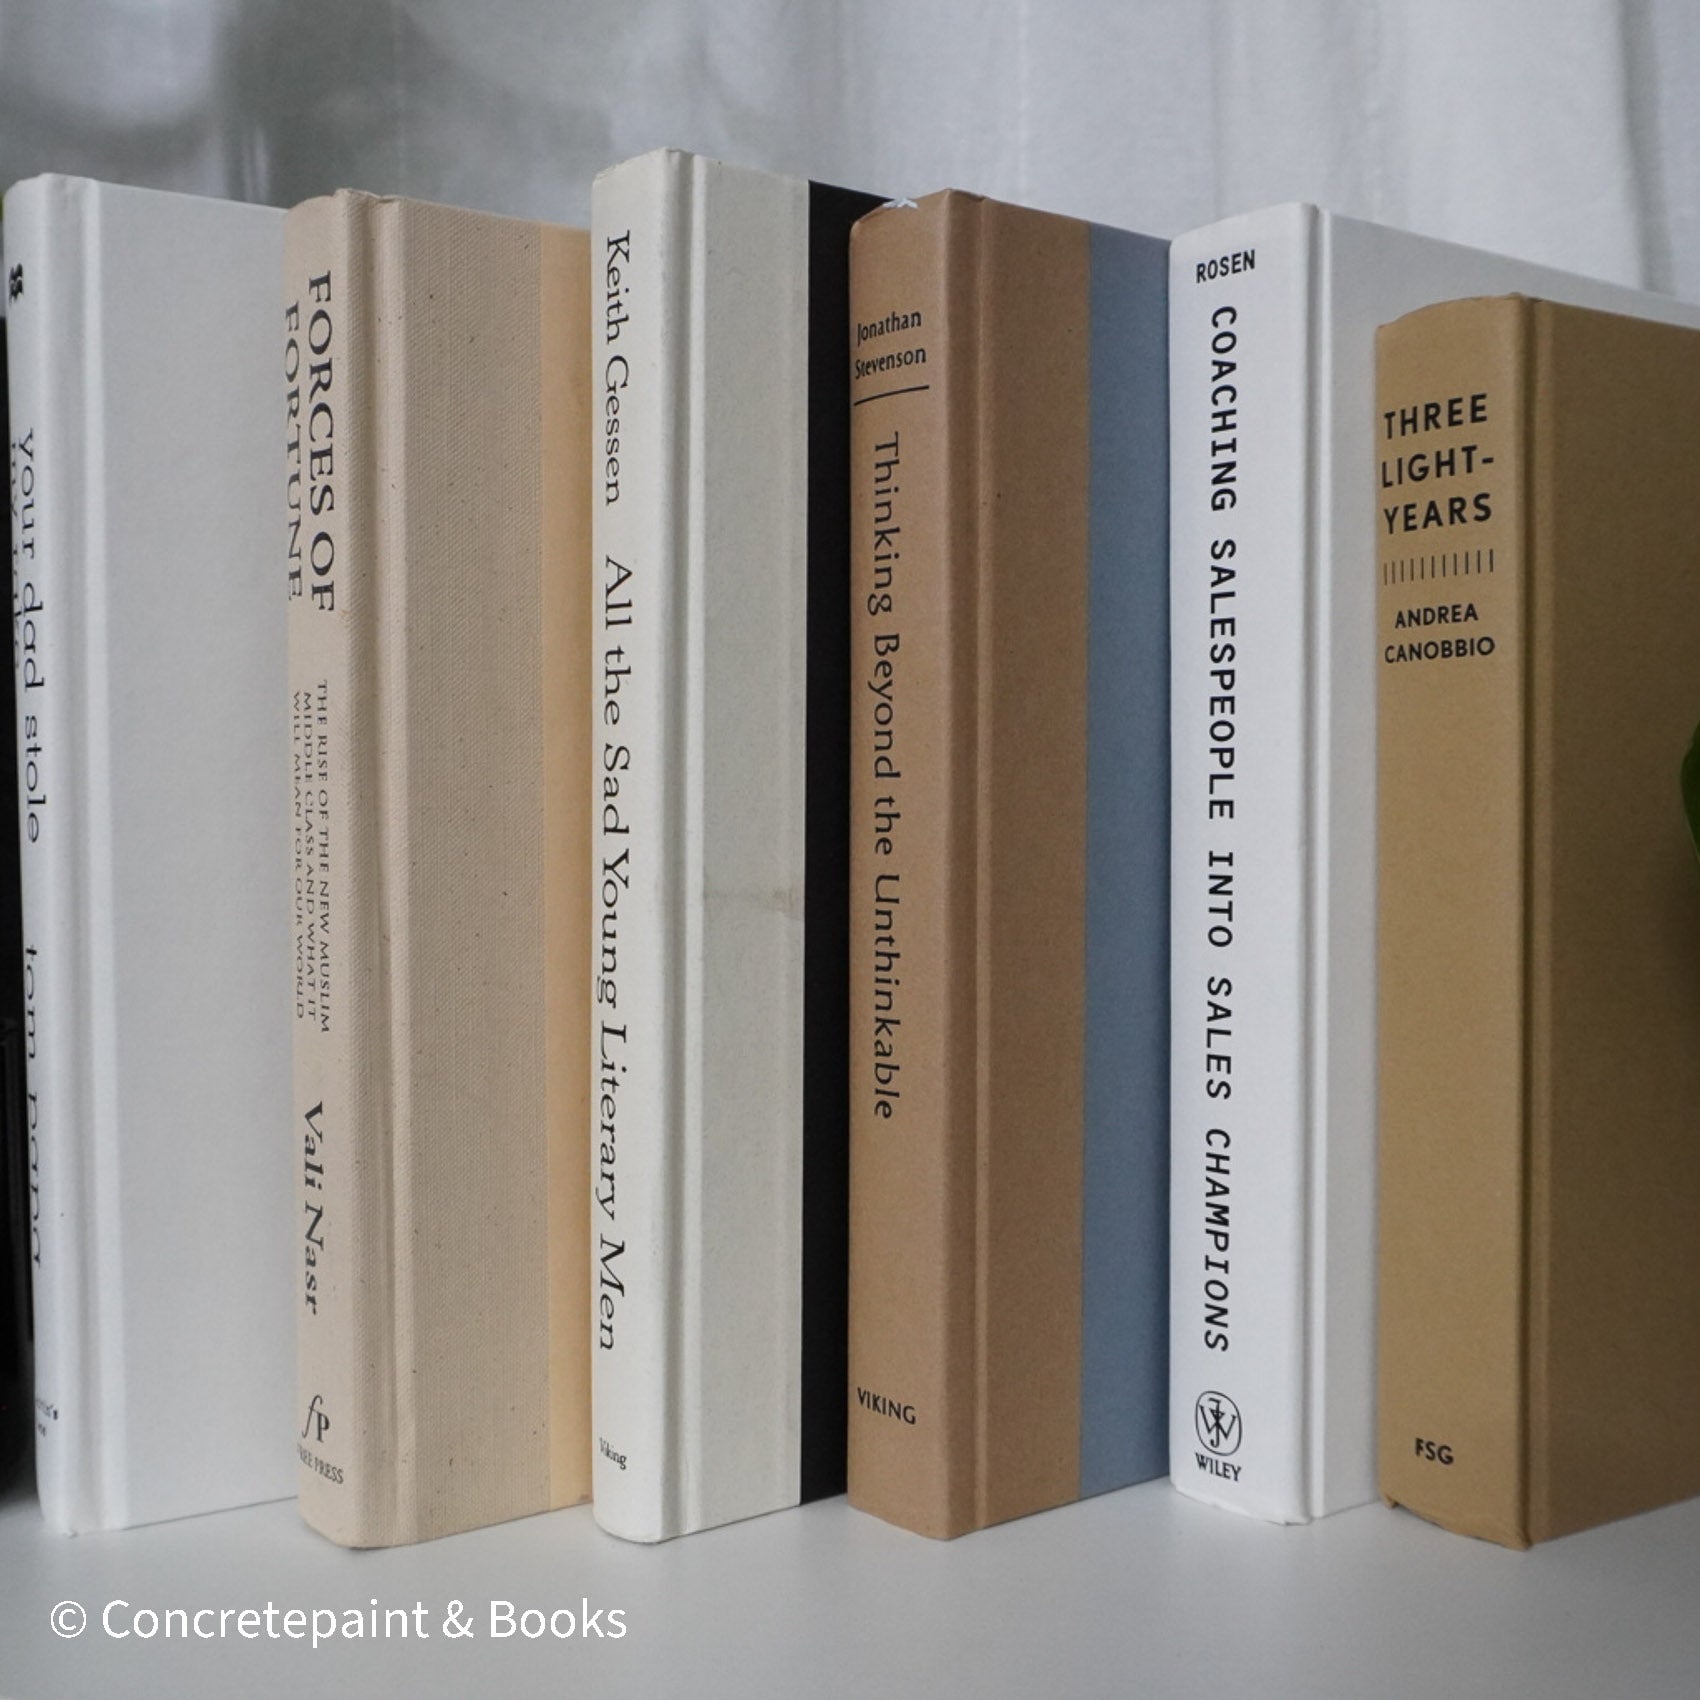 Neutral, sand and white books on display. Real hardcover books for decorating shelves.